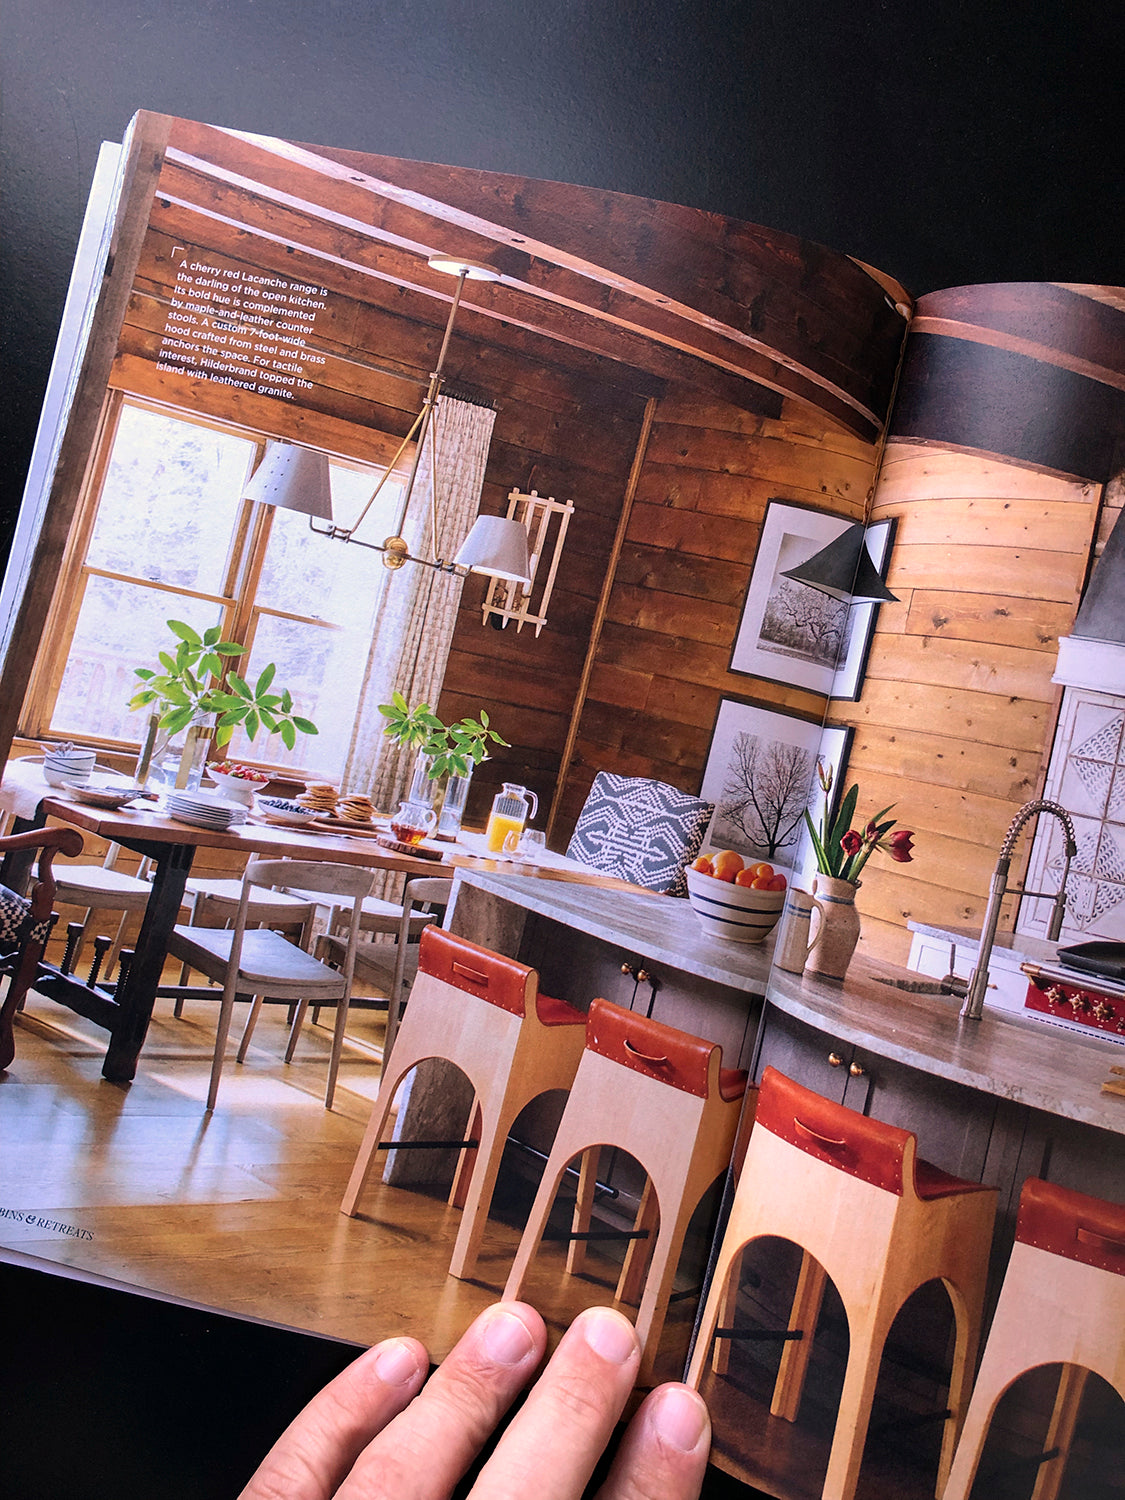 A spread for Cozy Cabins & Retreats shows two Keith Dotson landscape photographs. Interior design by Lisa Hilderbrand. Photographs by John Bessler.